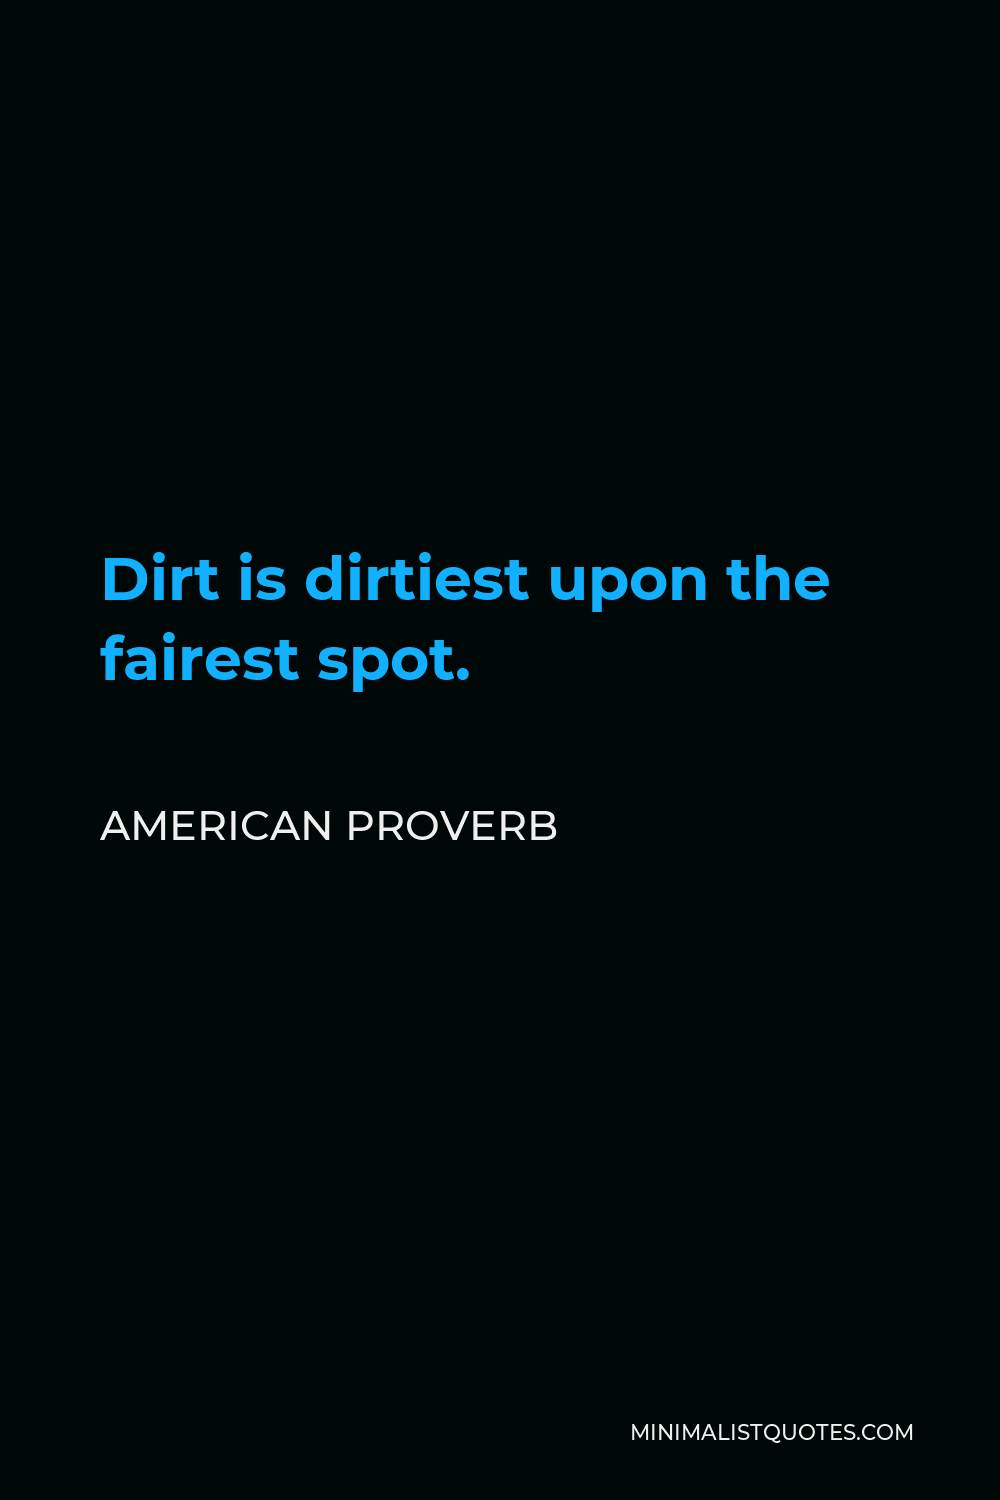 American Proverb Quote - Dirt is dirtiest upon the fairest spot.